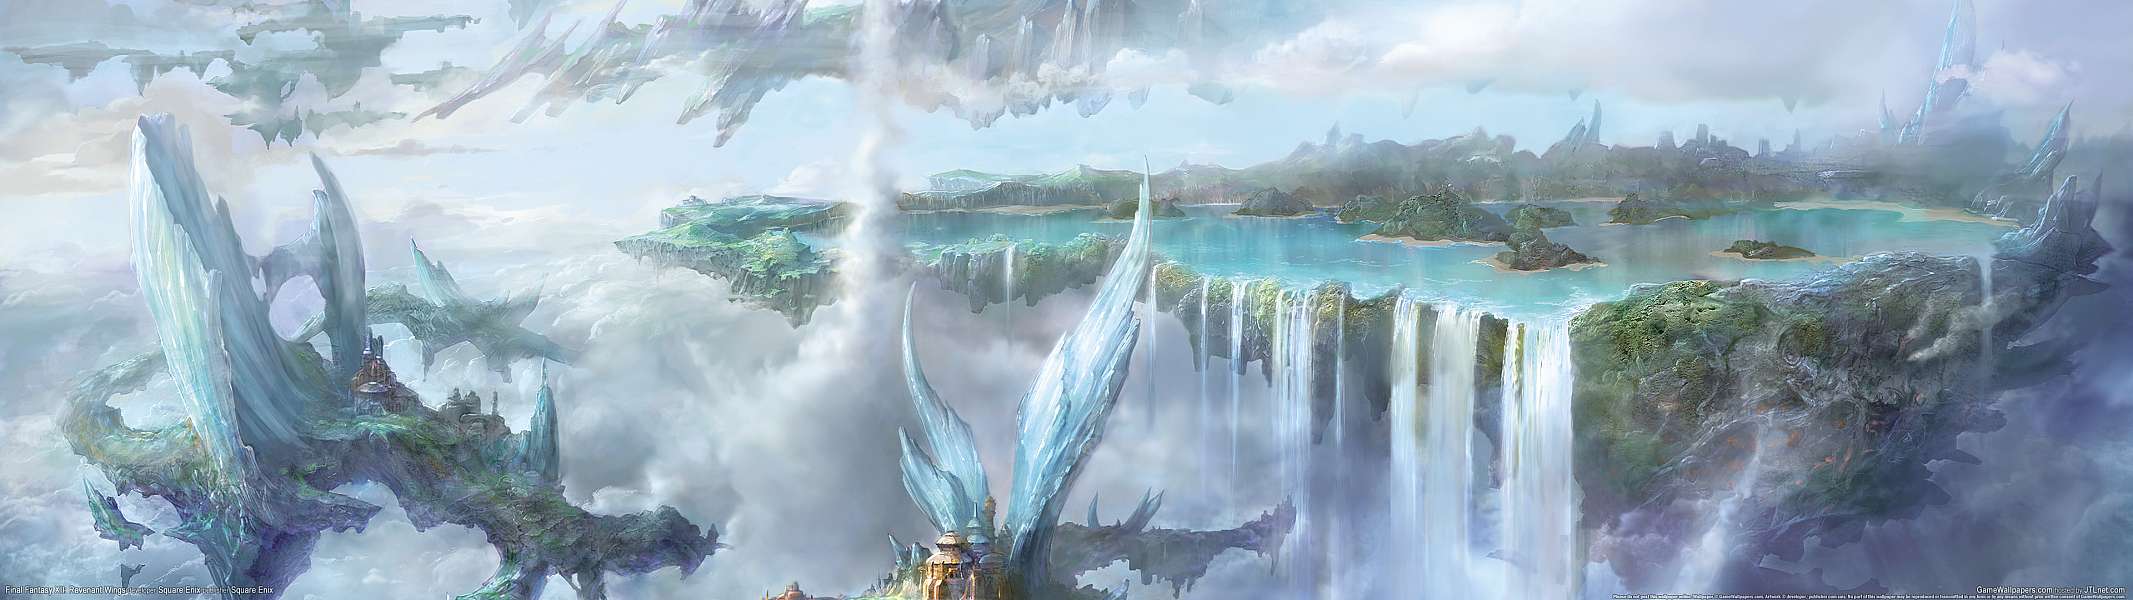 Final Fantasy 12: Revenant Wings dual screen achtergrond